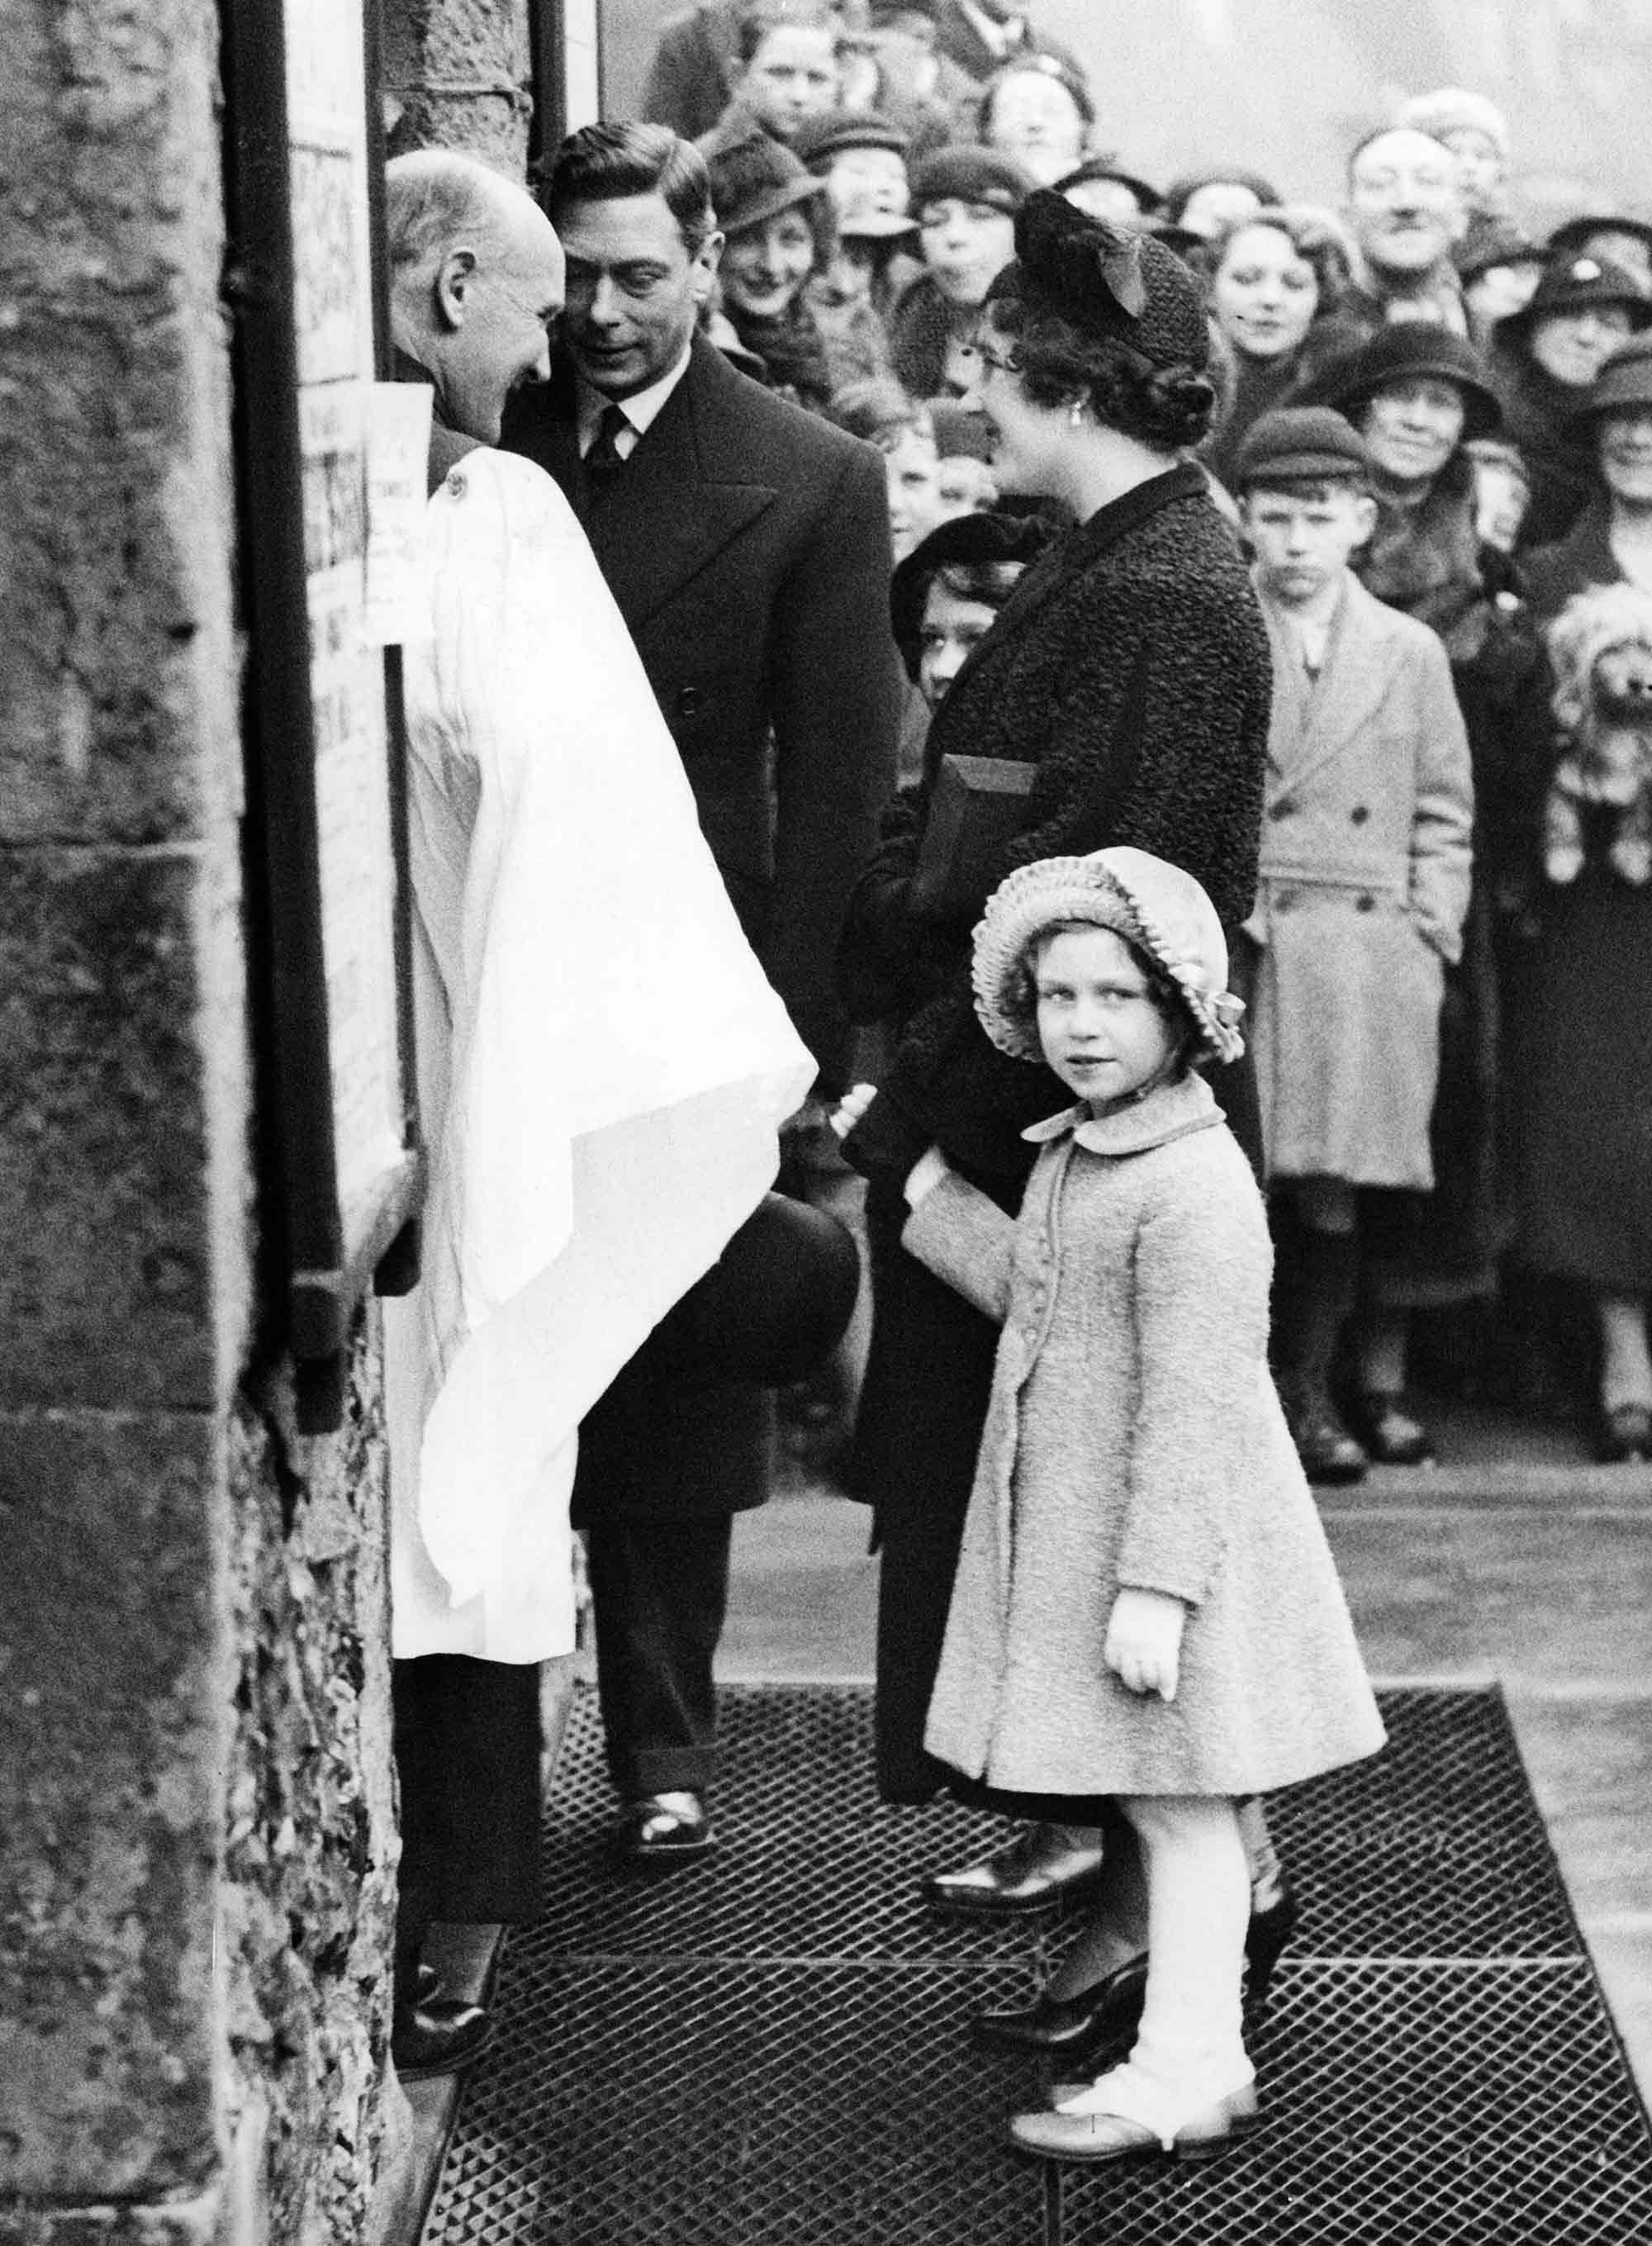 Princesses Elizabeth and Margaret with their mother Elizabeth Bowes-Lyon and father George VI being greeted by Reverend F.P. Hughes in front of St. Mary's Church in Eastbourne in 1936 © Sueddeutsche Zeitung Photo / Alamy Stock Photo